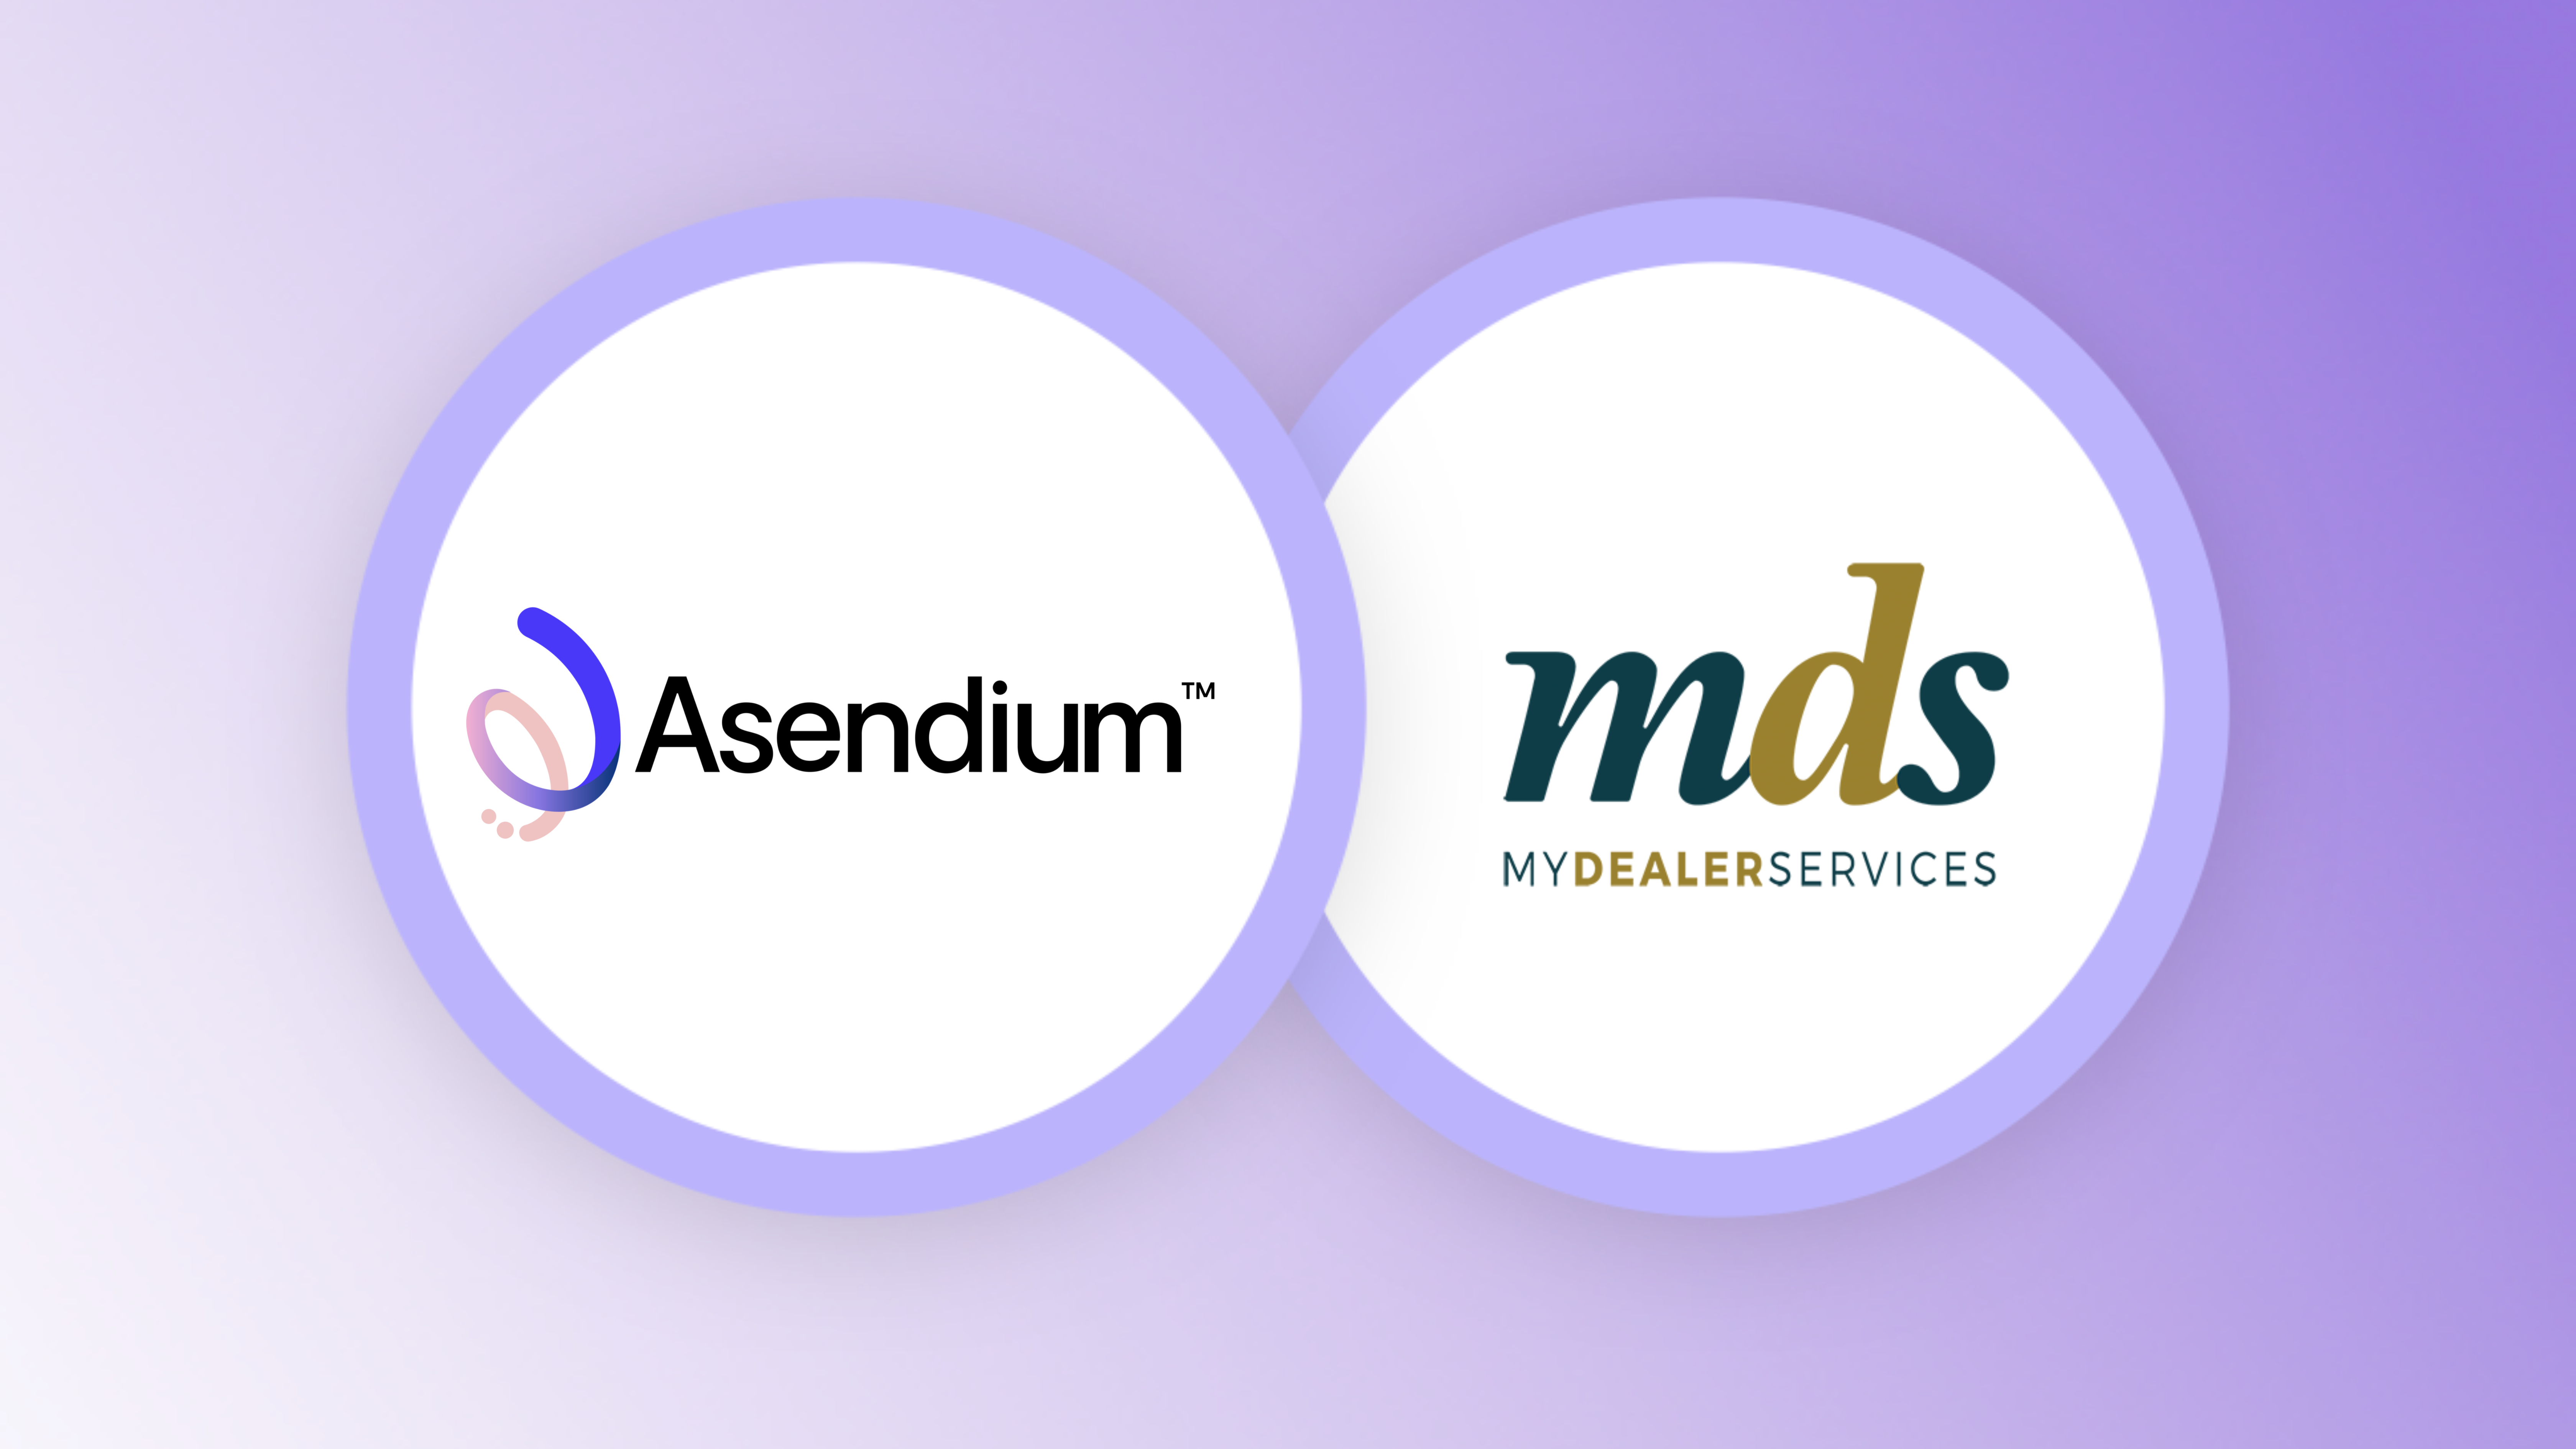 Graphic depicting both Asendium's and My Dealer Service's logos side by side.